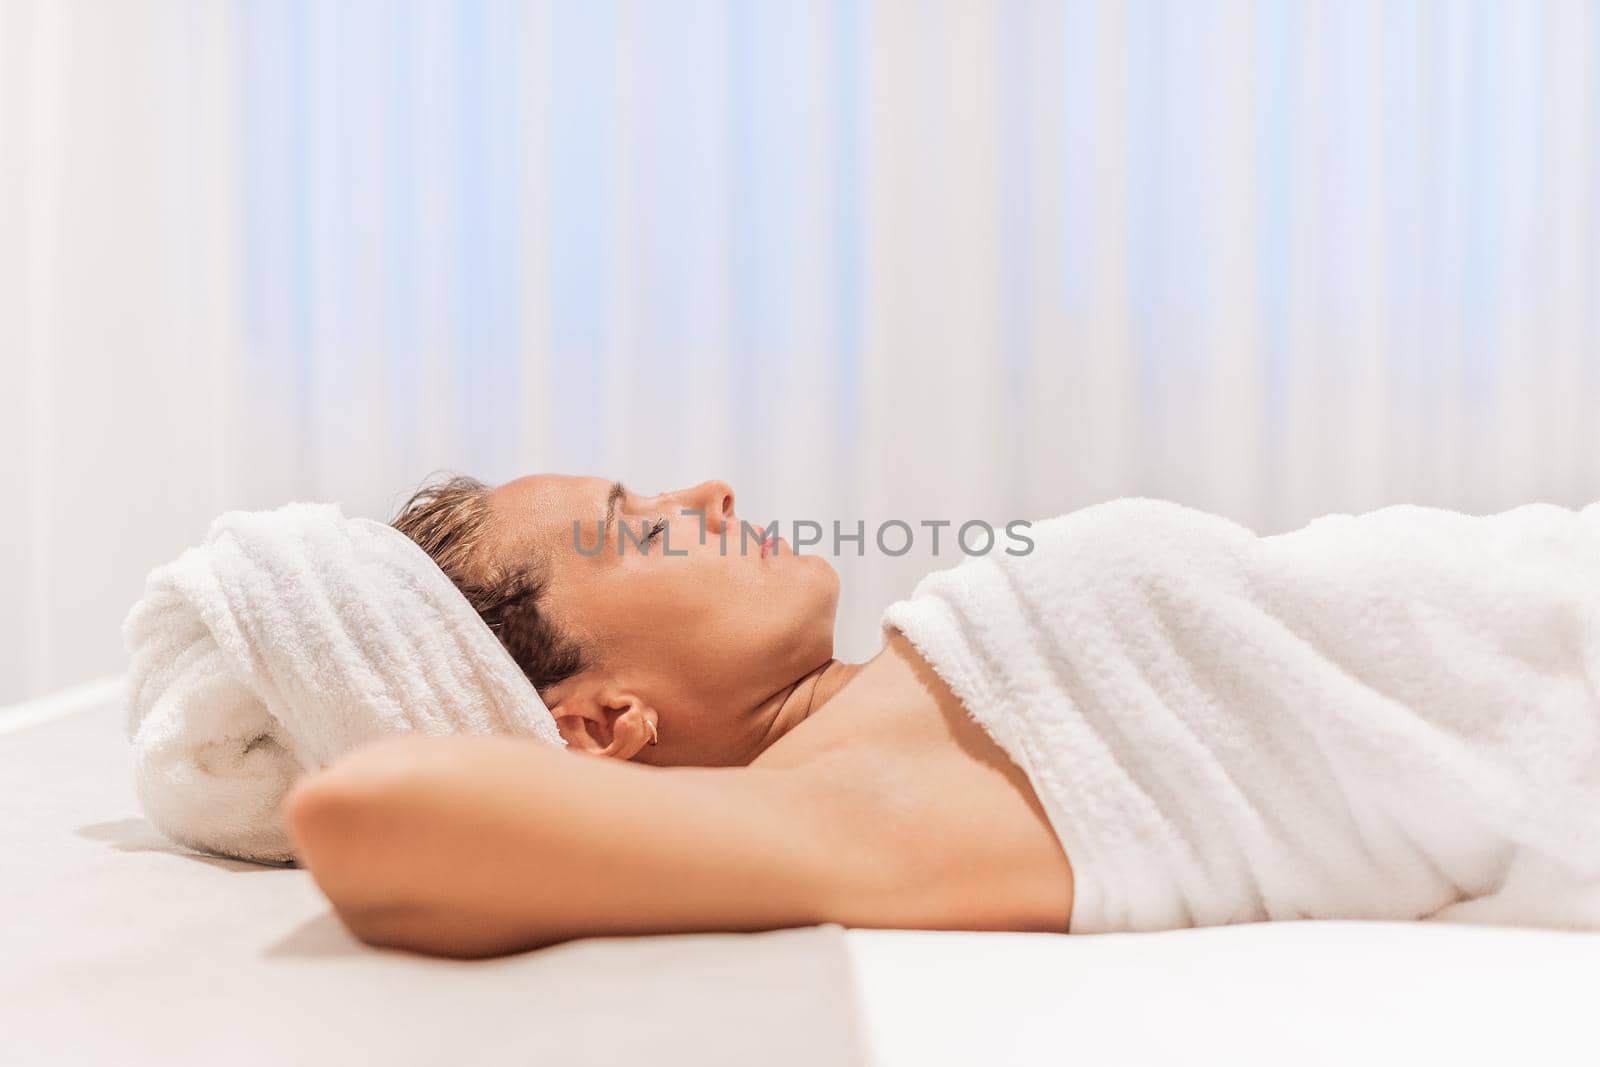 Woman wrapped in towels after showering lying in bed. by ivanmoreno